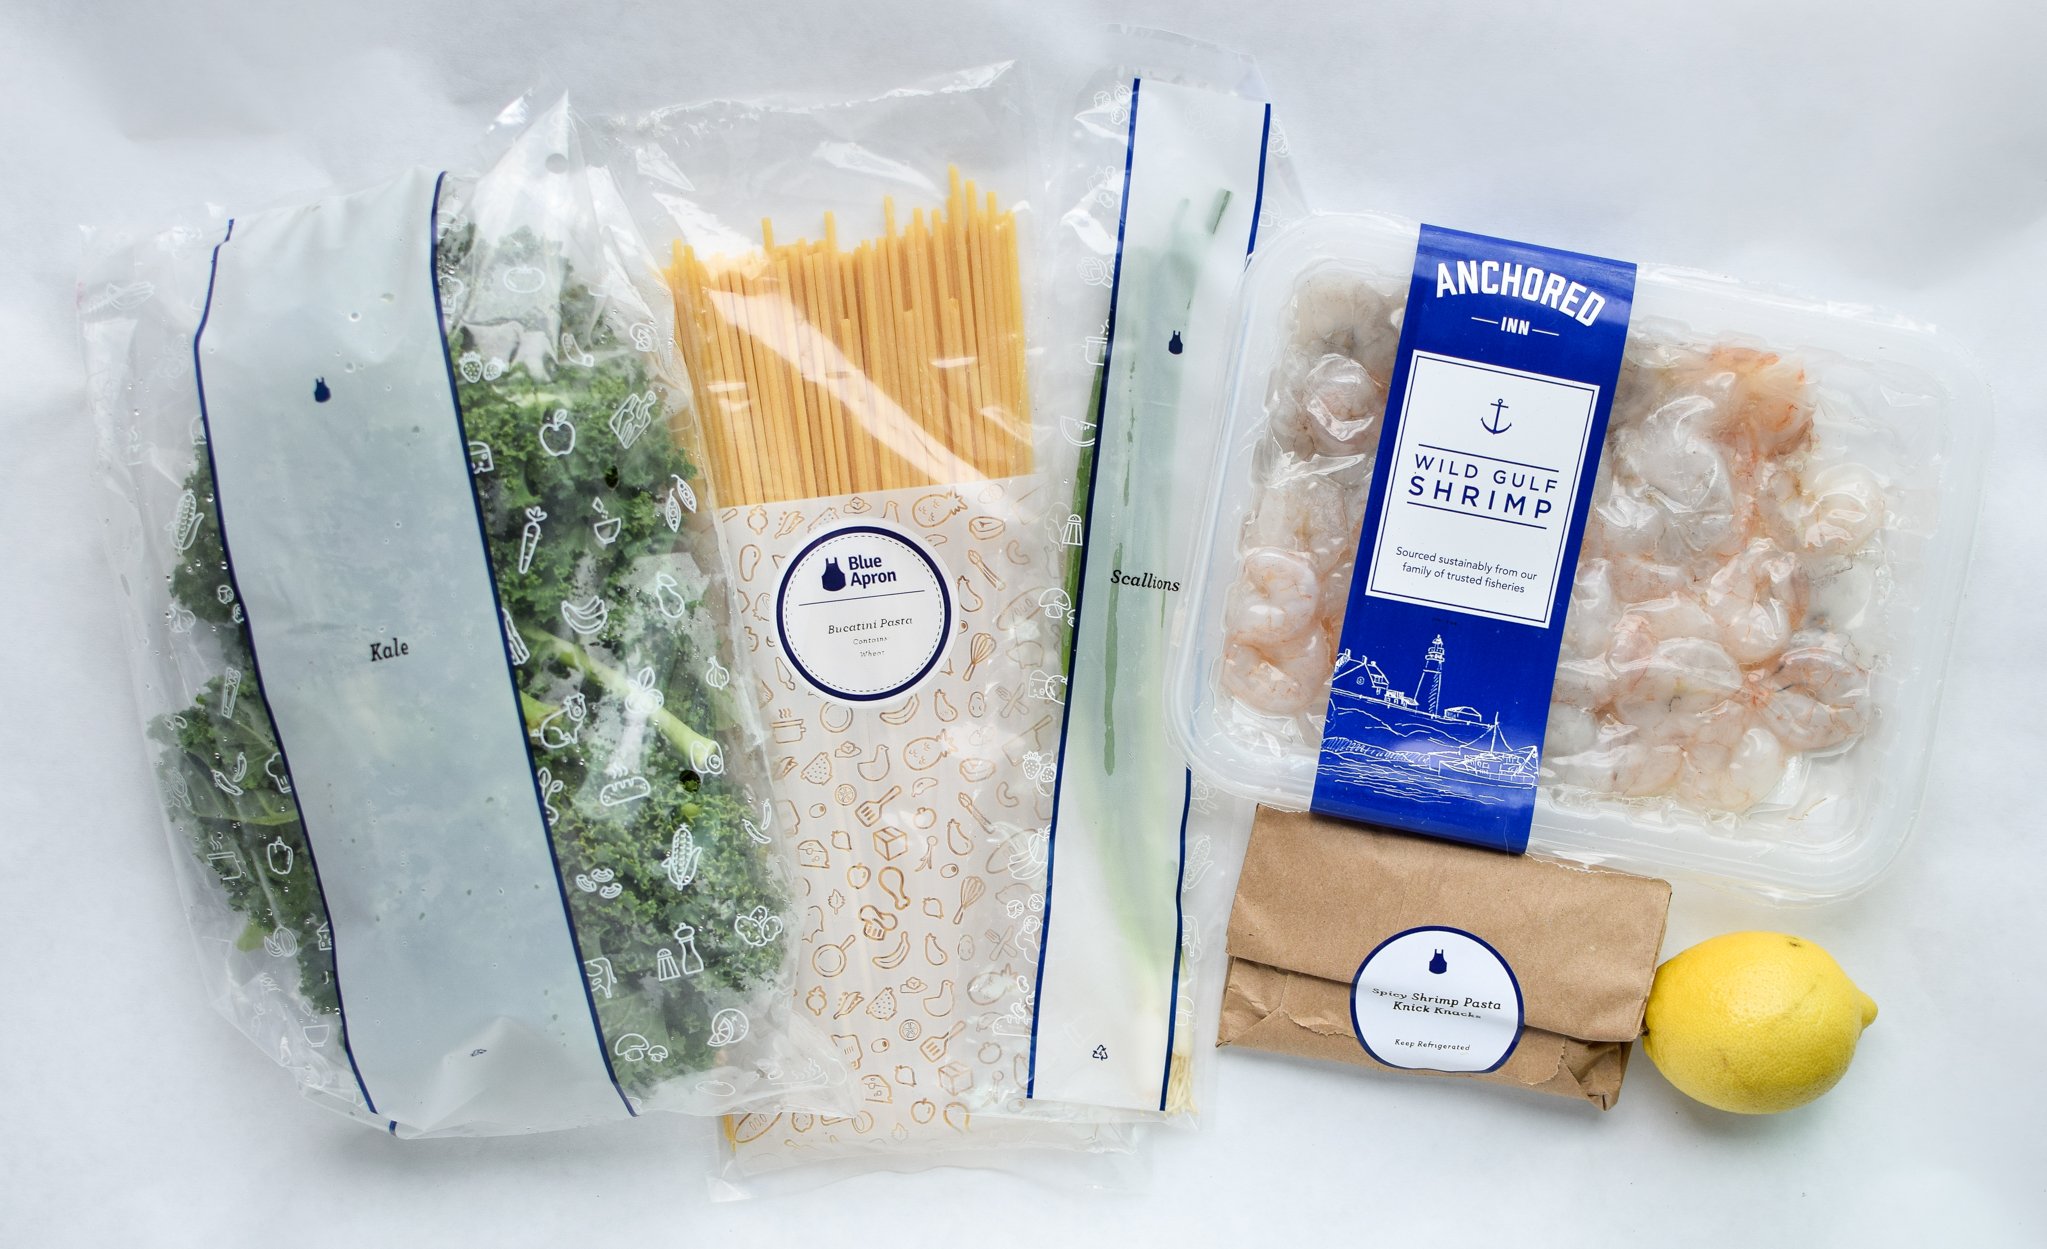 blue apron food delivery services